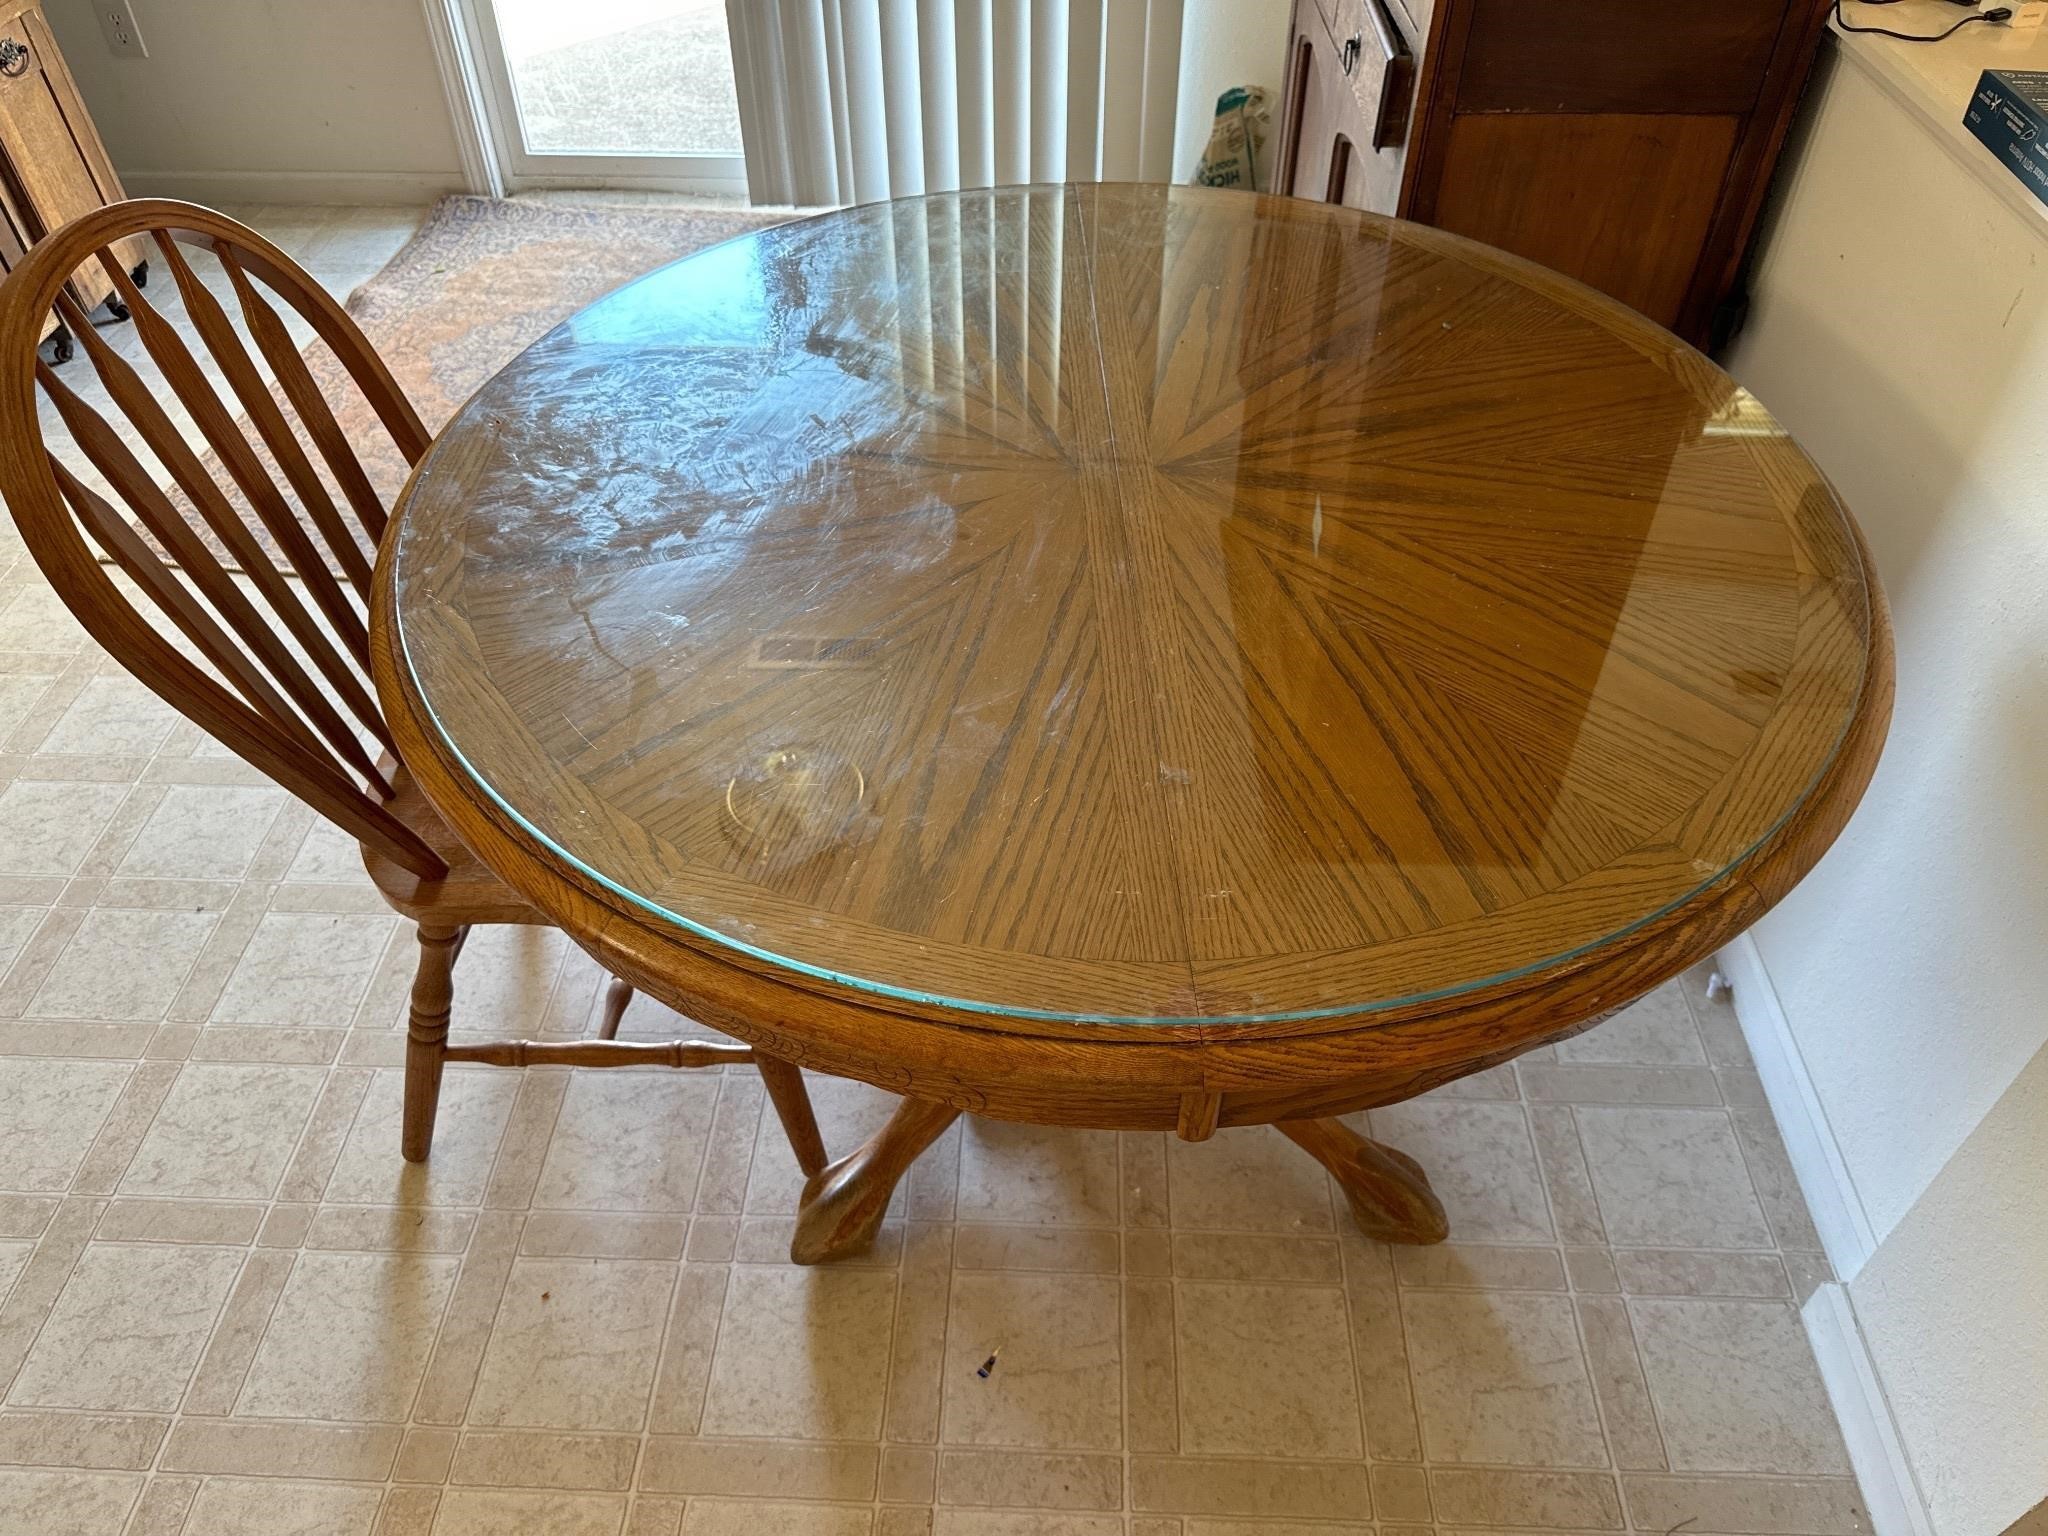 Table and 1 chair